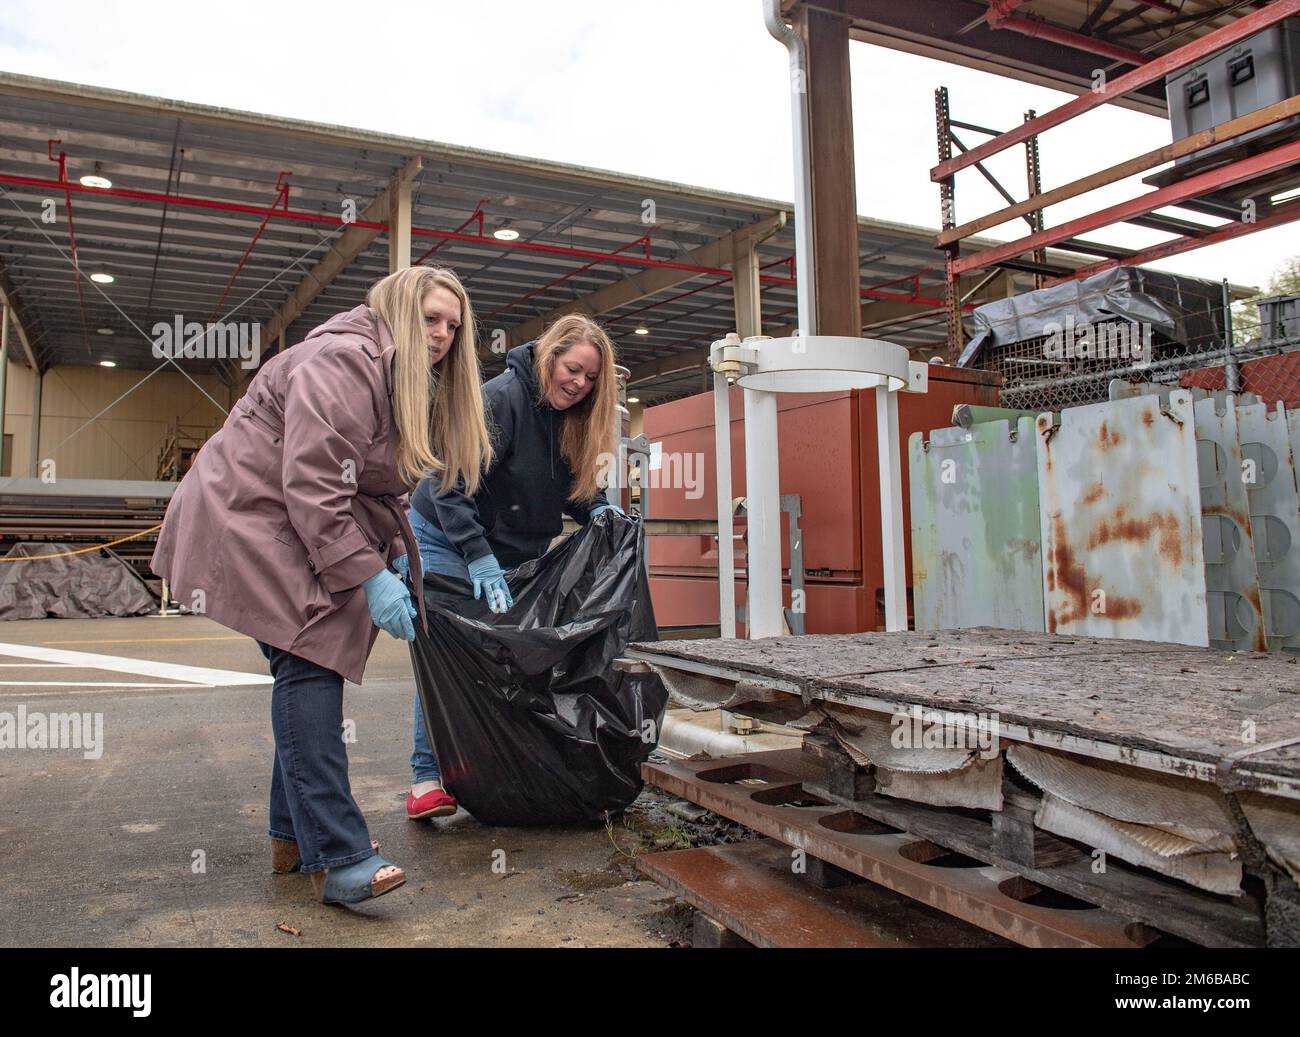 SILVERDALE, Wash. (April 22, 2022) – Glenda Sippel (left), a program analyst at Trident Refit Facility, Bangor (TRFB), and Kimberly Perdue, a resource manager at TRFB, participate in a cleanup at TRFB in celebration of Earth Day 2022. The Earth Day 2022 cleanup was hosted as an effort to help protect the environment and foster stewardship in the local area. TRFB supports the nation’s strategic deterrence mission by repairing, incrementally overhauling, and modernizing Pacific Fleet strategic ballistic missile submarines during refits. Stock Photo